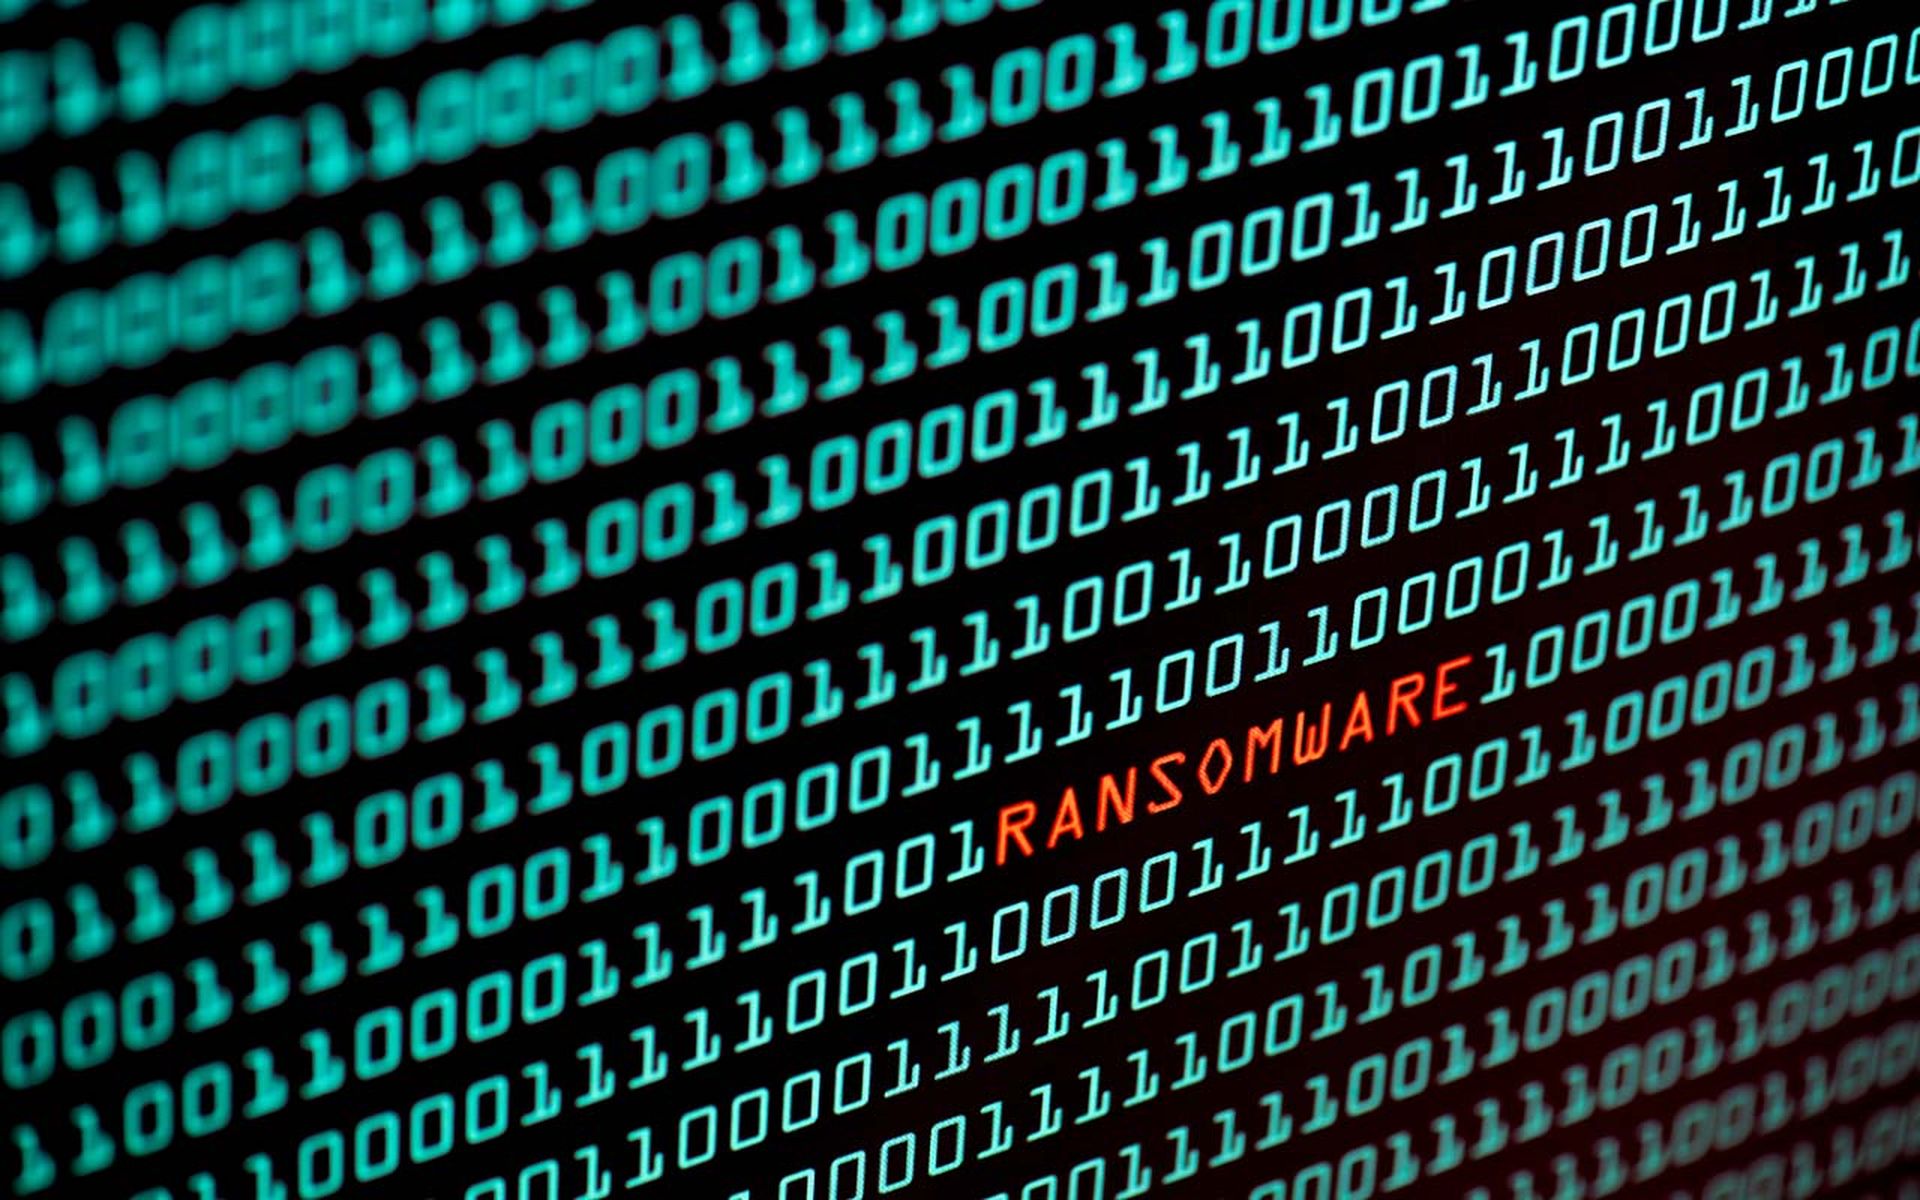 RansomwareRansomware or Wannacry text and binary code concept from the desktop screen.